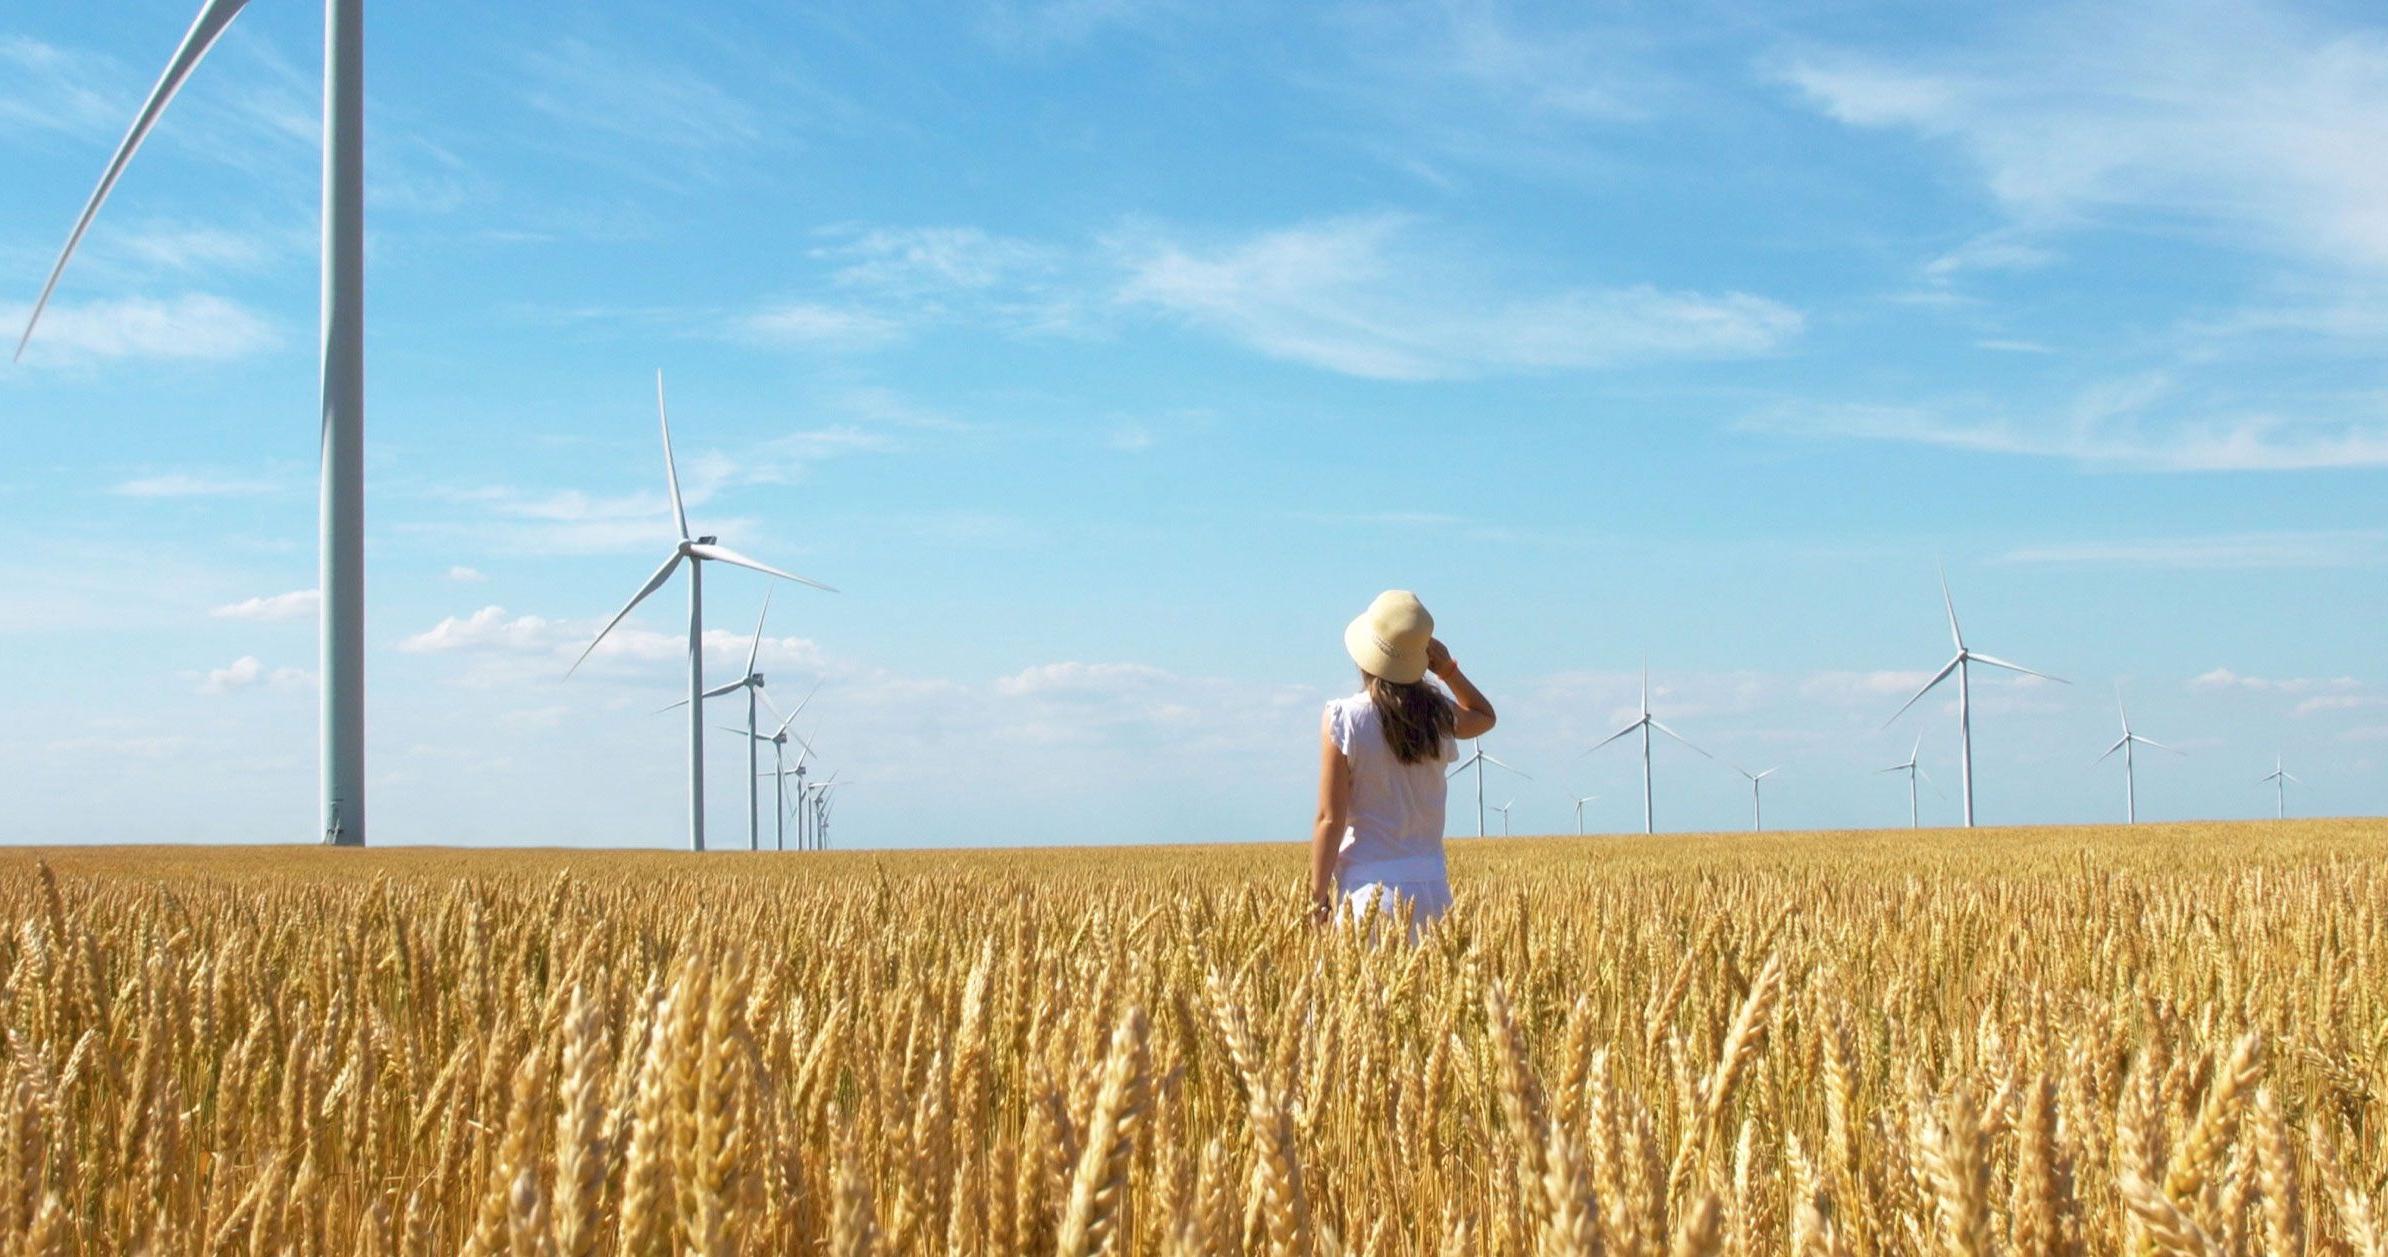 Woman standing in wheat fields with windmills that generate sustainable energy.